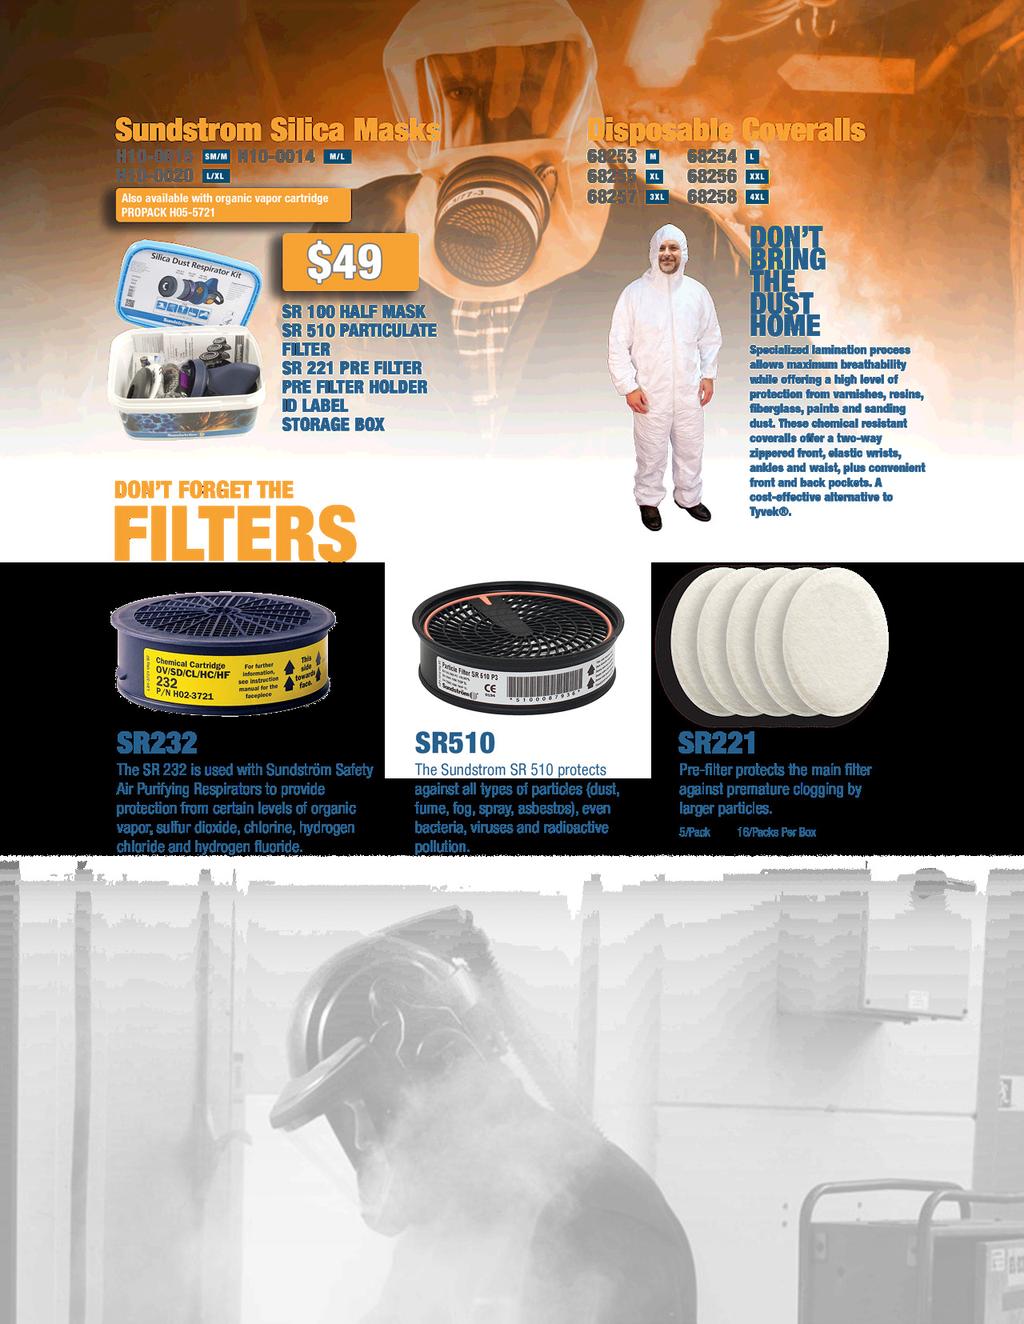 MUST BE REPLACED DAILY FAR LESS COST OVER TIME KIT Sundstrom Pre-filters extend P100 filter life up to 5 TIMES longer and are 40% less expensive over time than N95 disposable respirators.